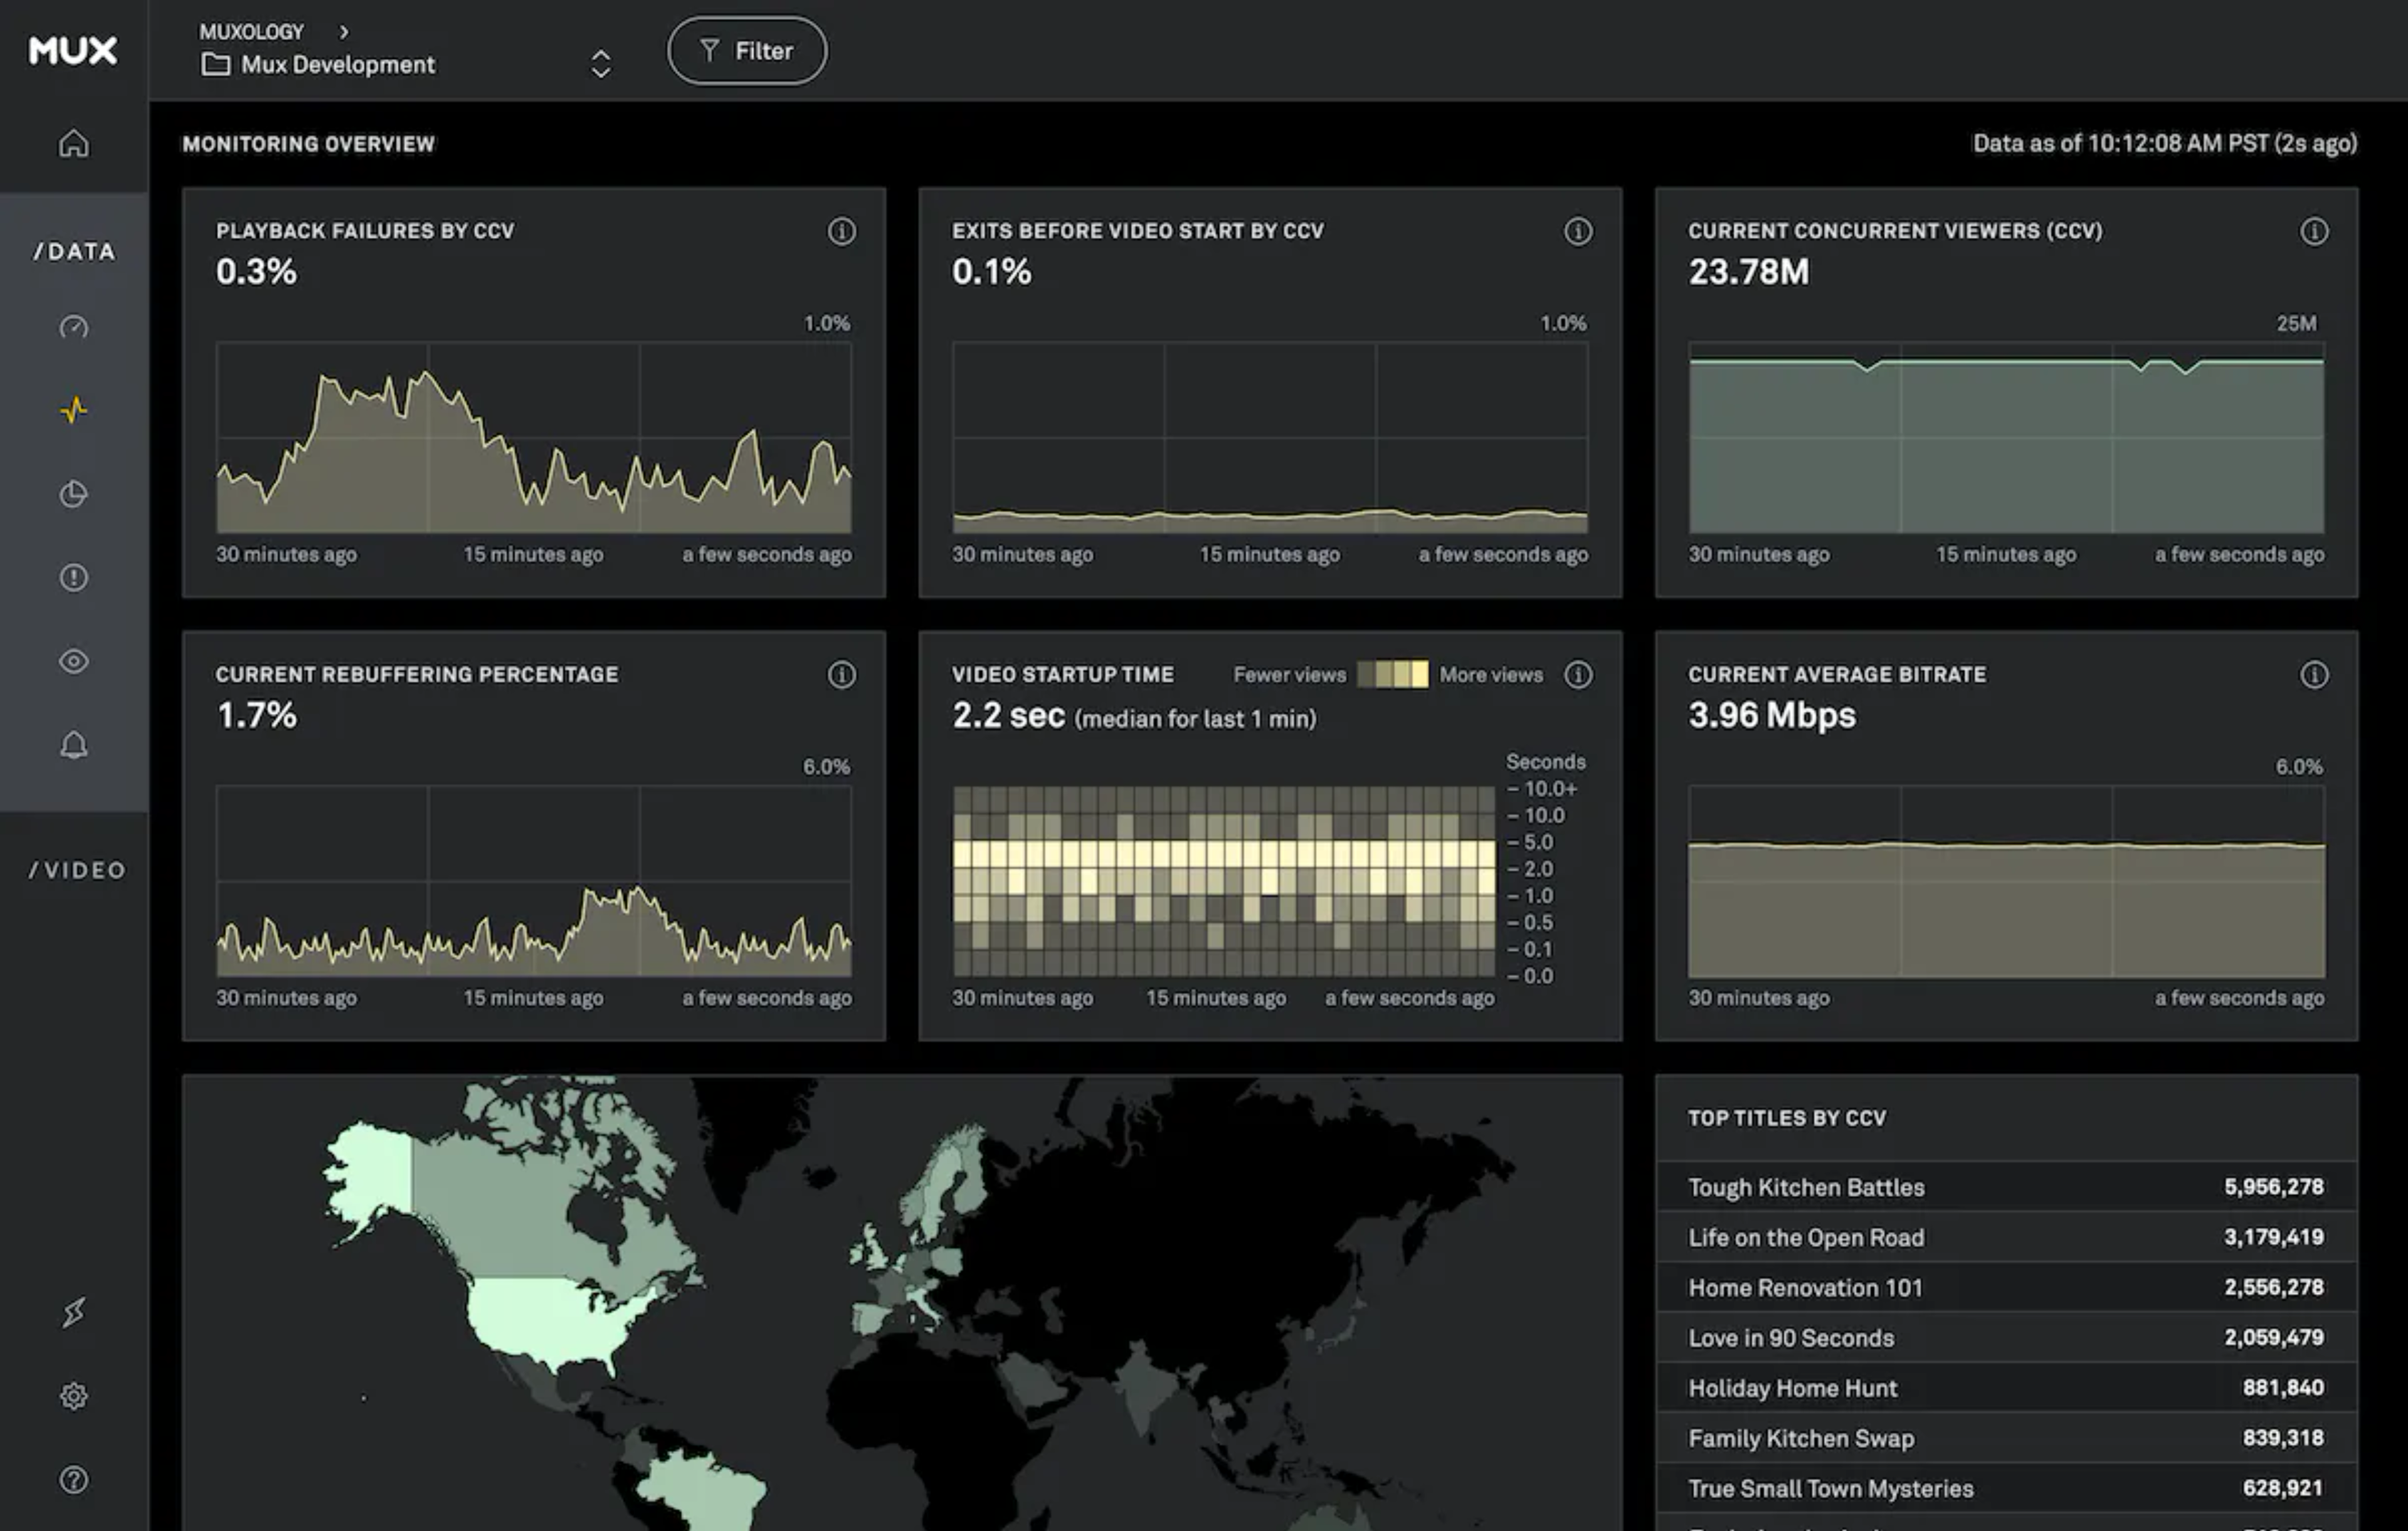 An image of Mux's monitoring dashboard which is a visual command center of the real-time quality of engagement metrics to monitor and optimize the viewer experience.